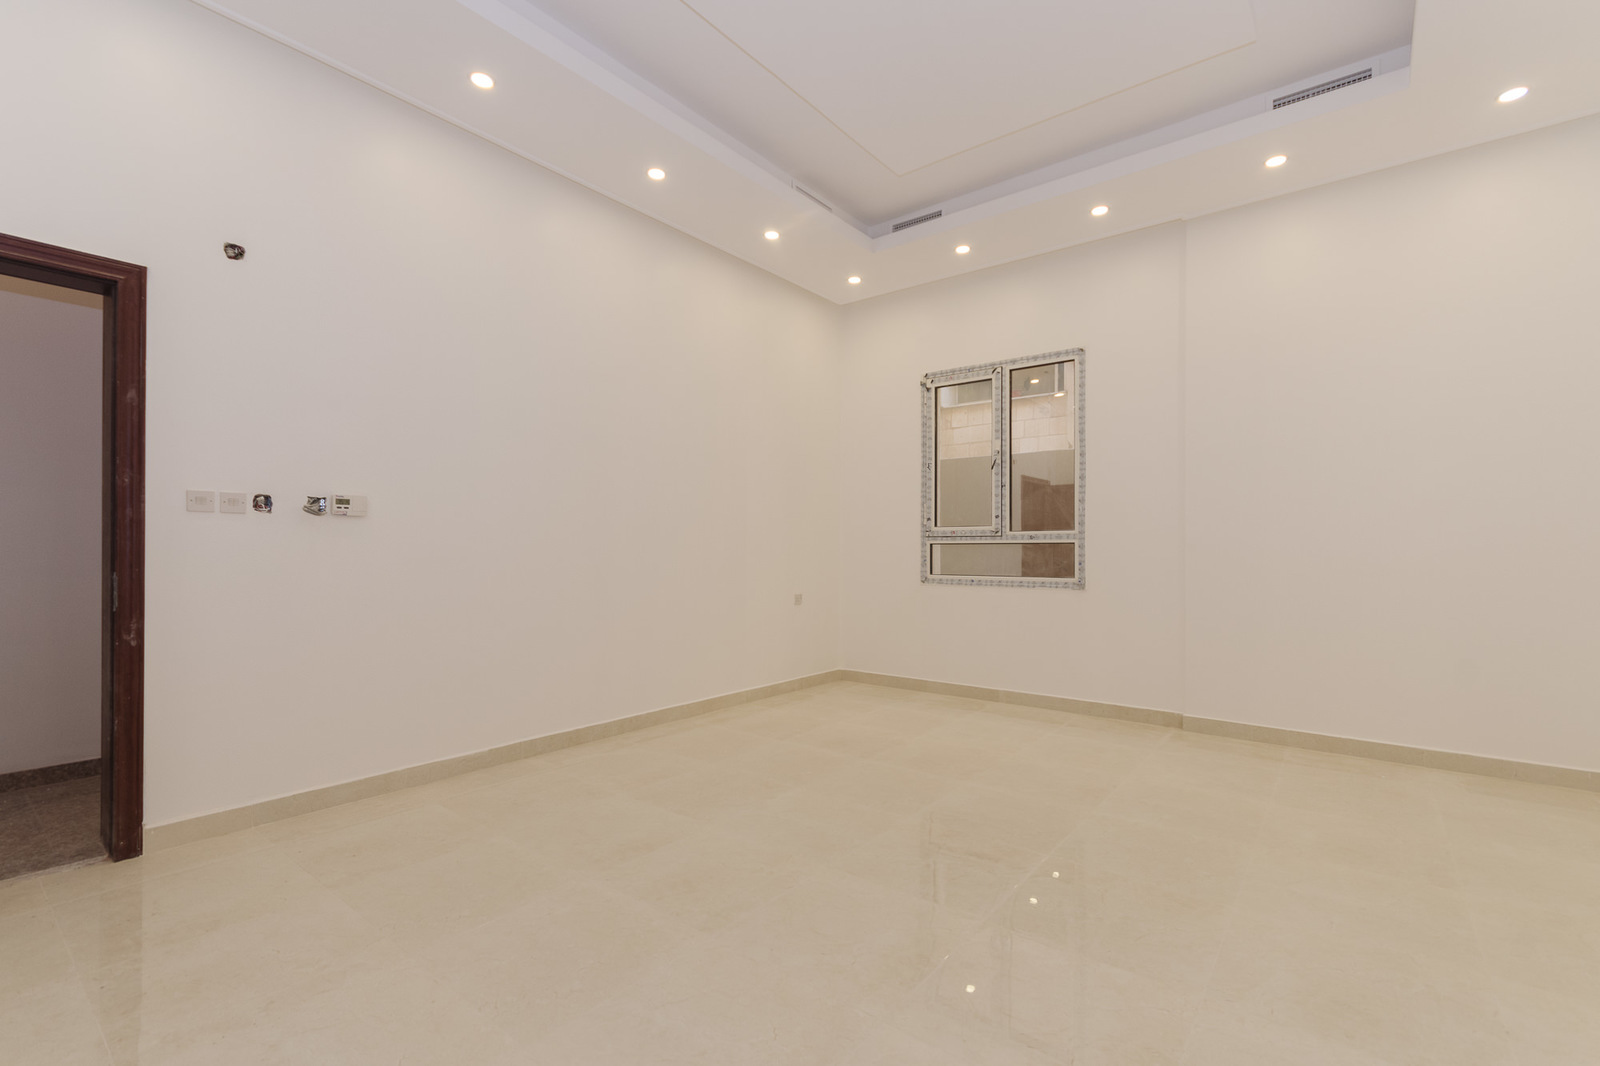 Salwa – new, unfurnished, two bedroom apartment